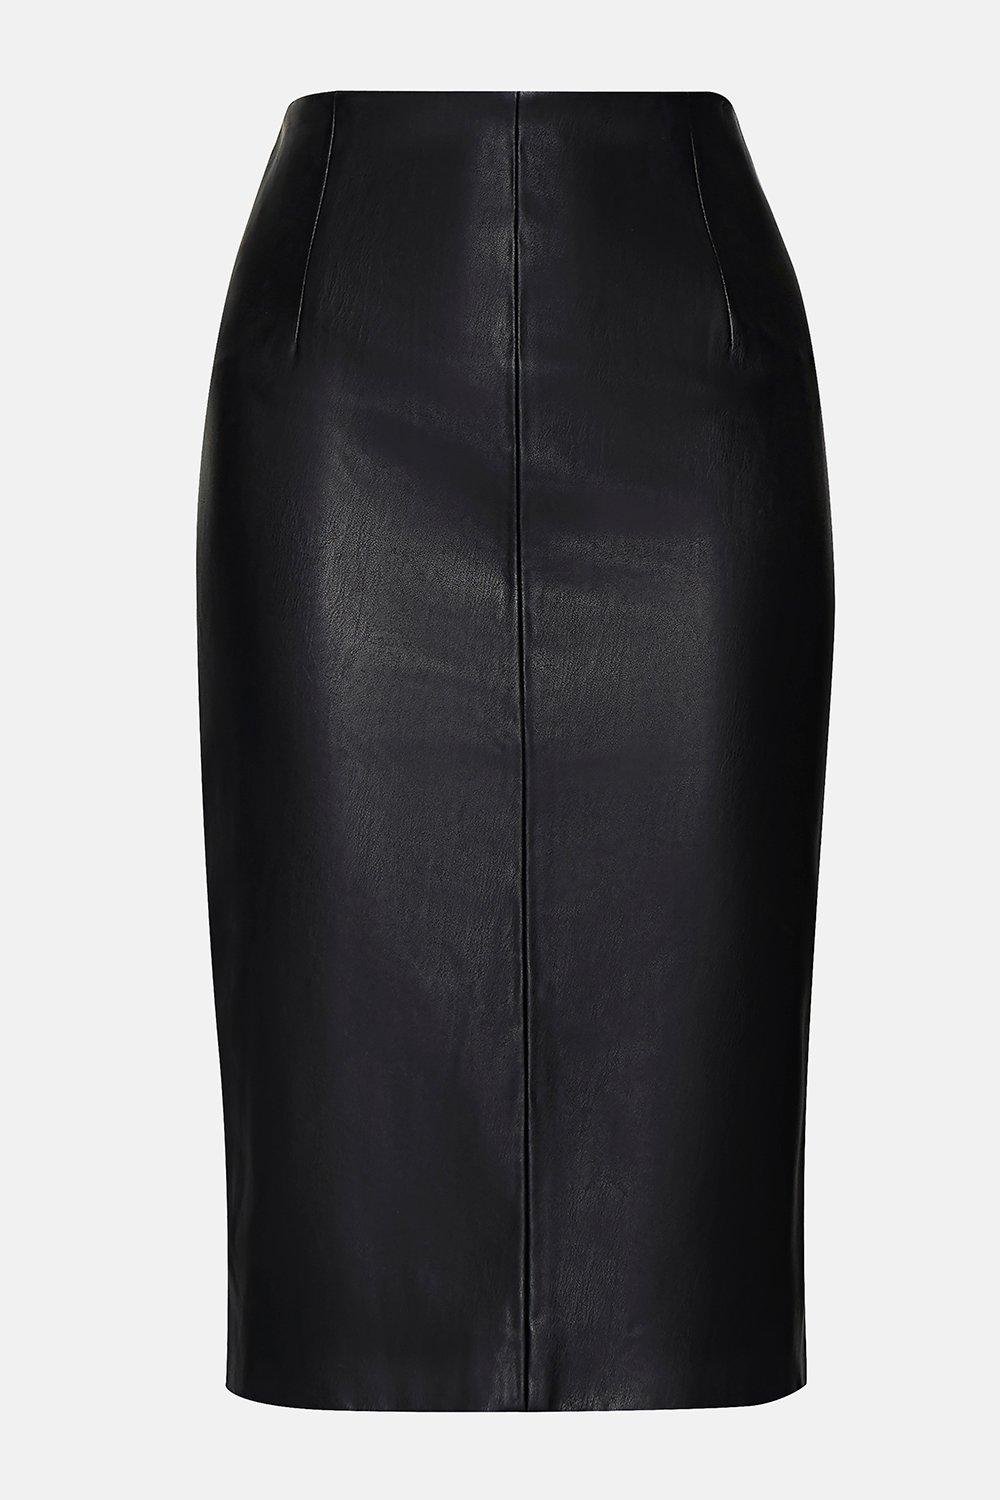 SPANX, Skirts, Spanx Faux Leather Pencil Skirt